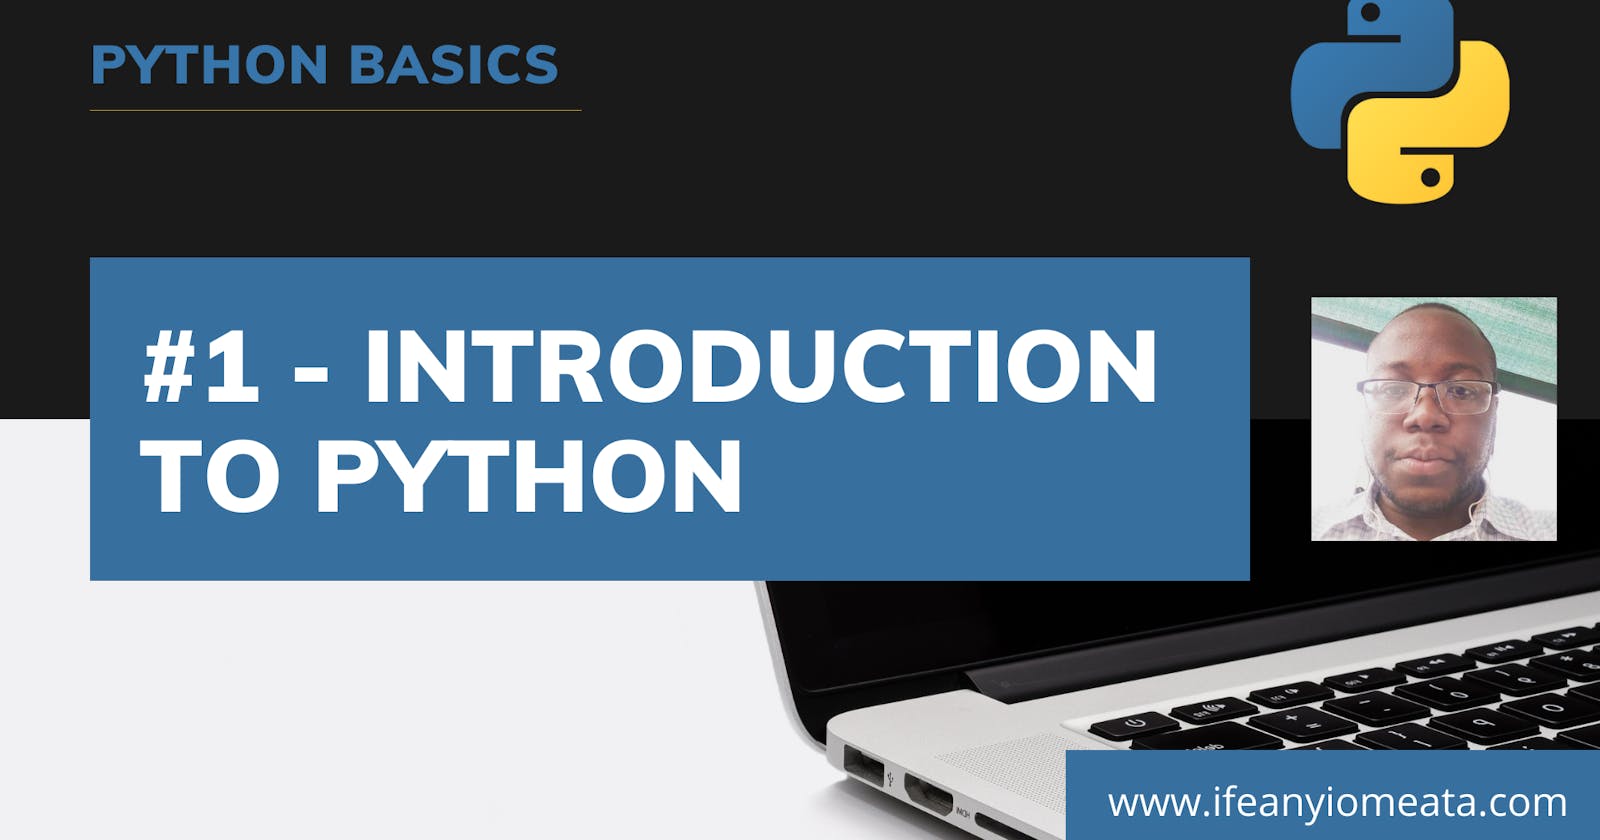 # 1 - Introduction to Python